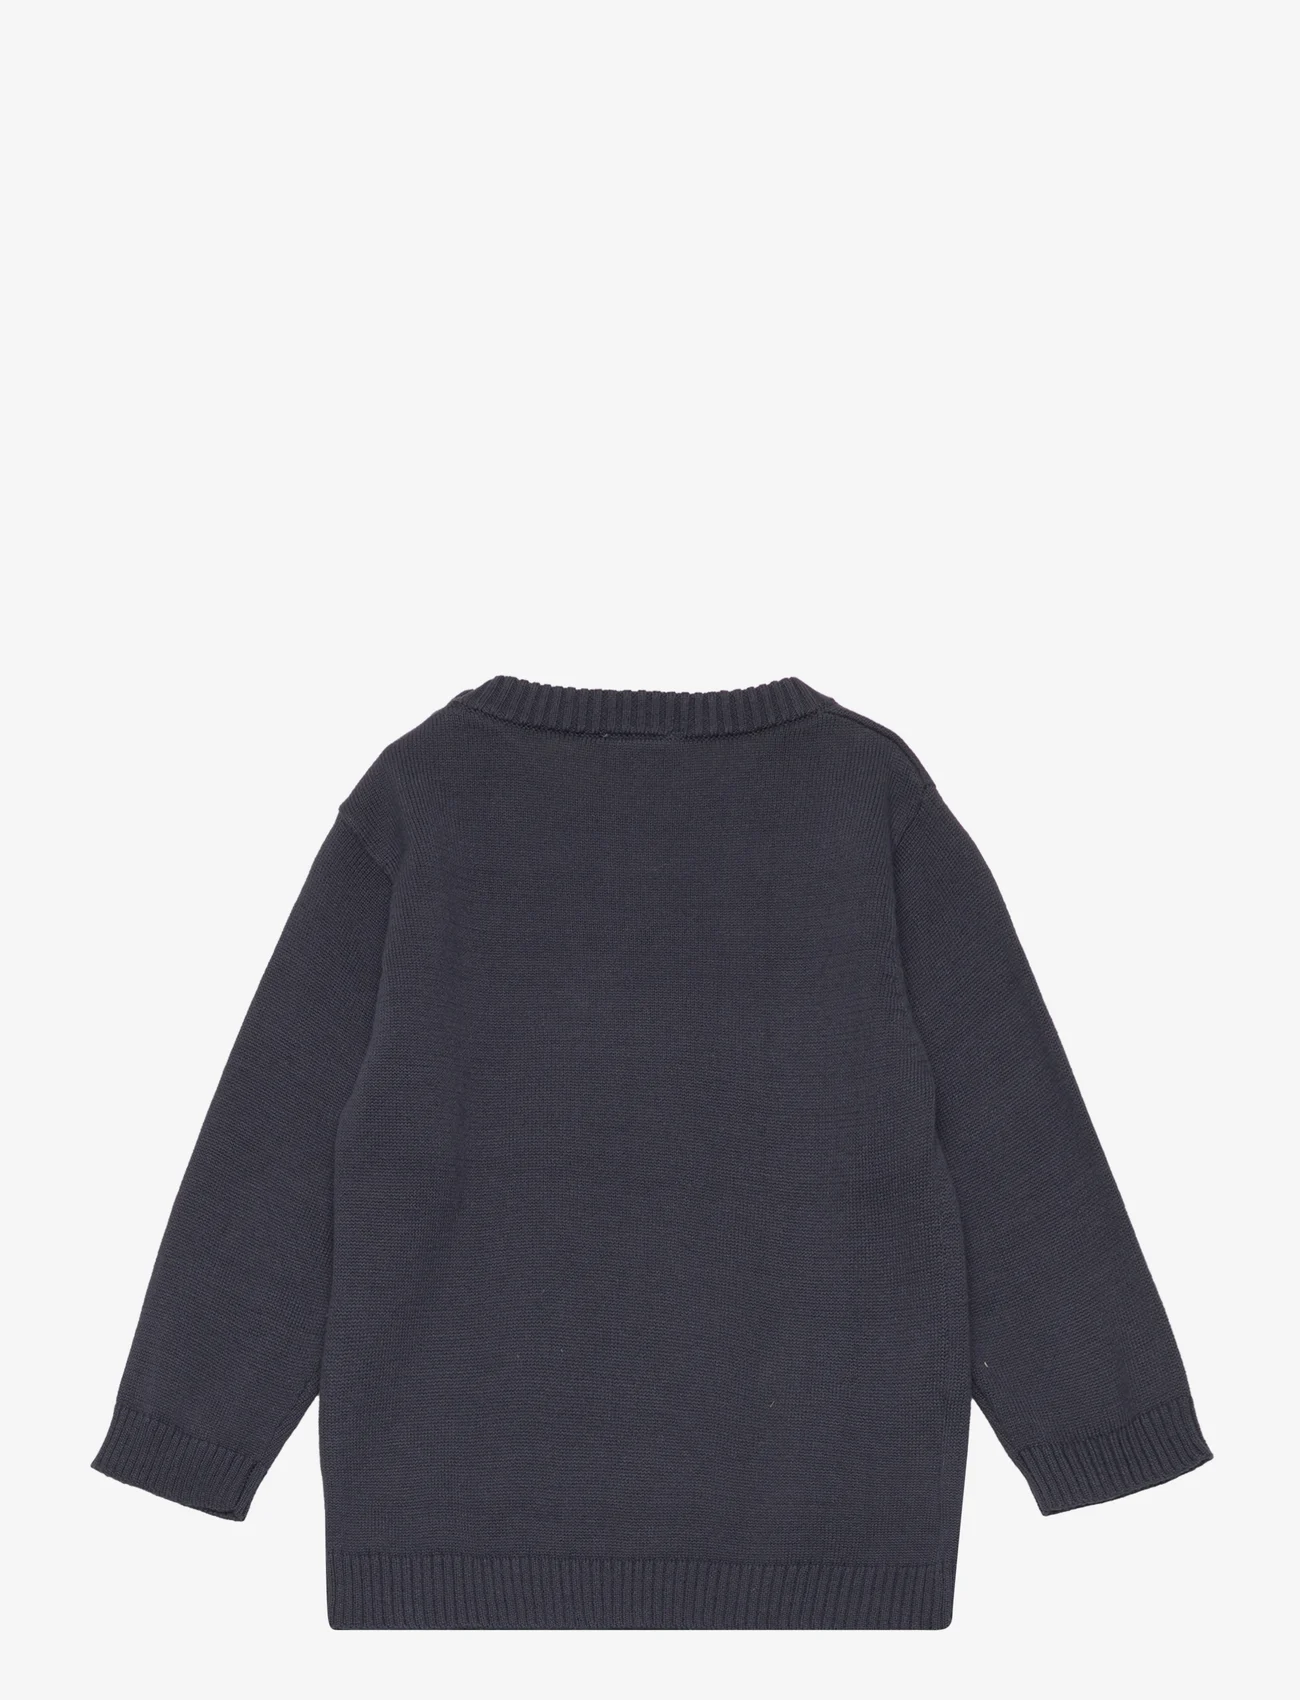 Hust & Claire - Pilou - Pullover - pullover - blue night - 1